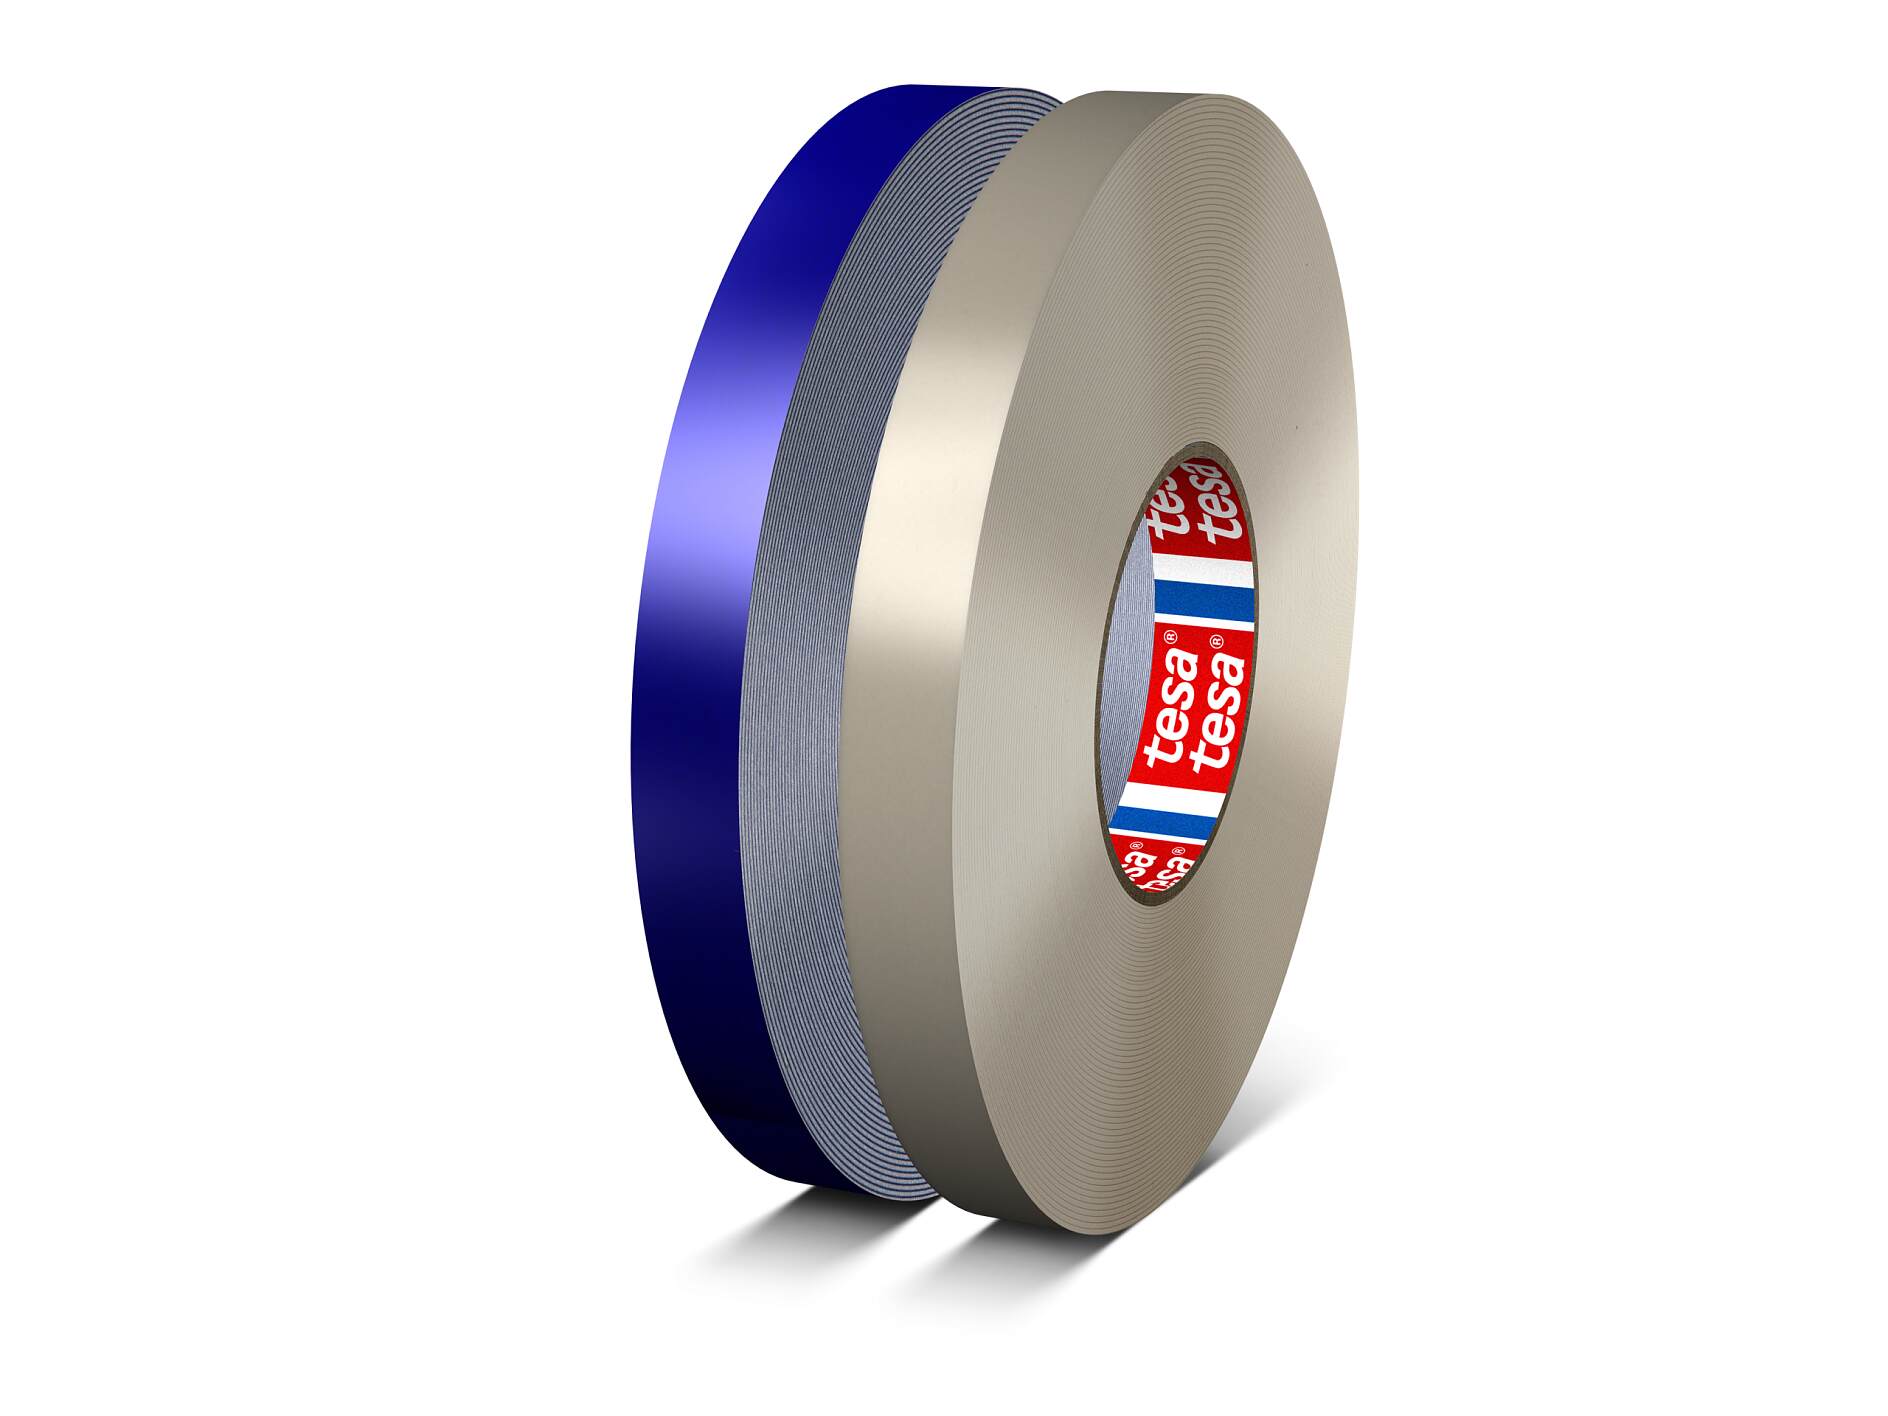 Tesa 61395 Tape: Double-Sided Adhesive for Sensitive Repairs